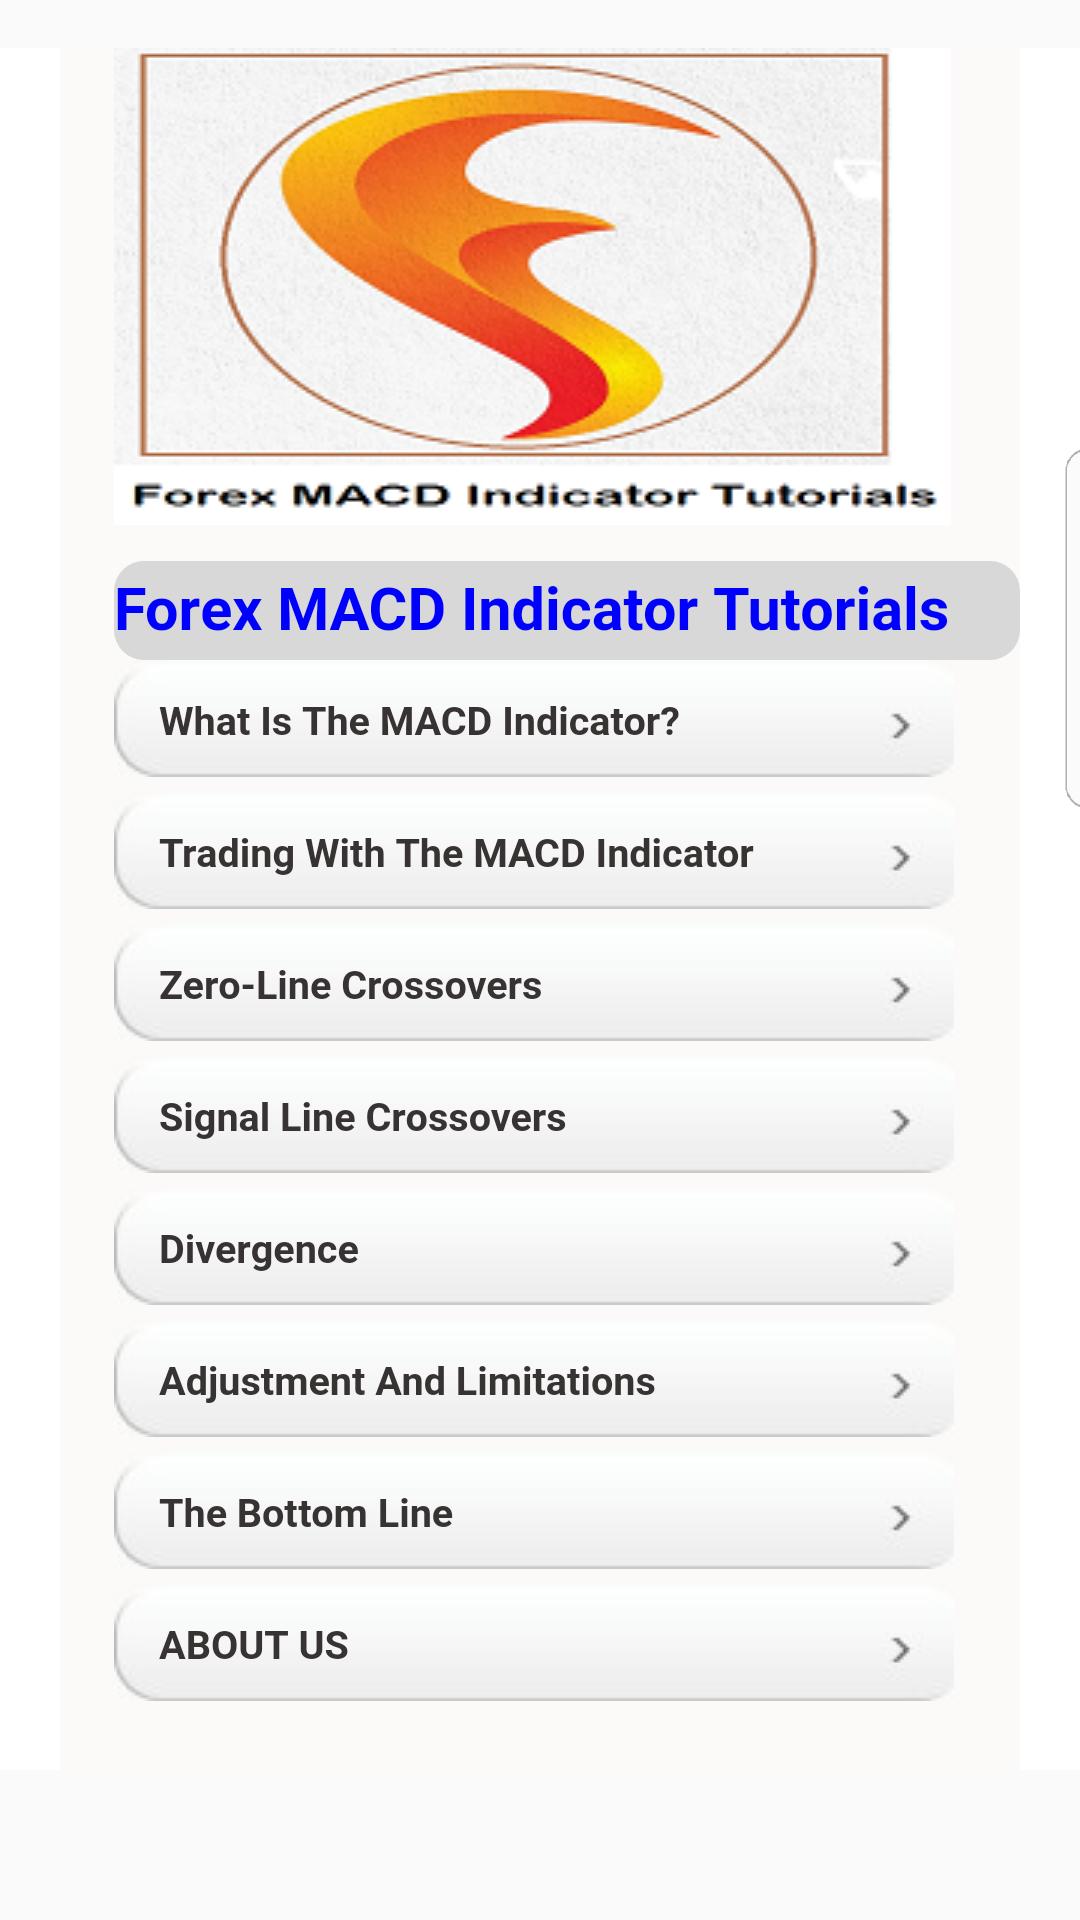 Forex Macd Indicator Learning Tutorials For Android Apk Download - 